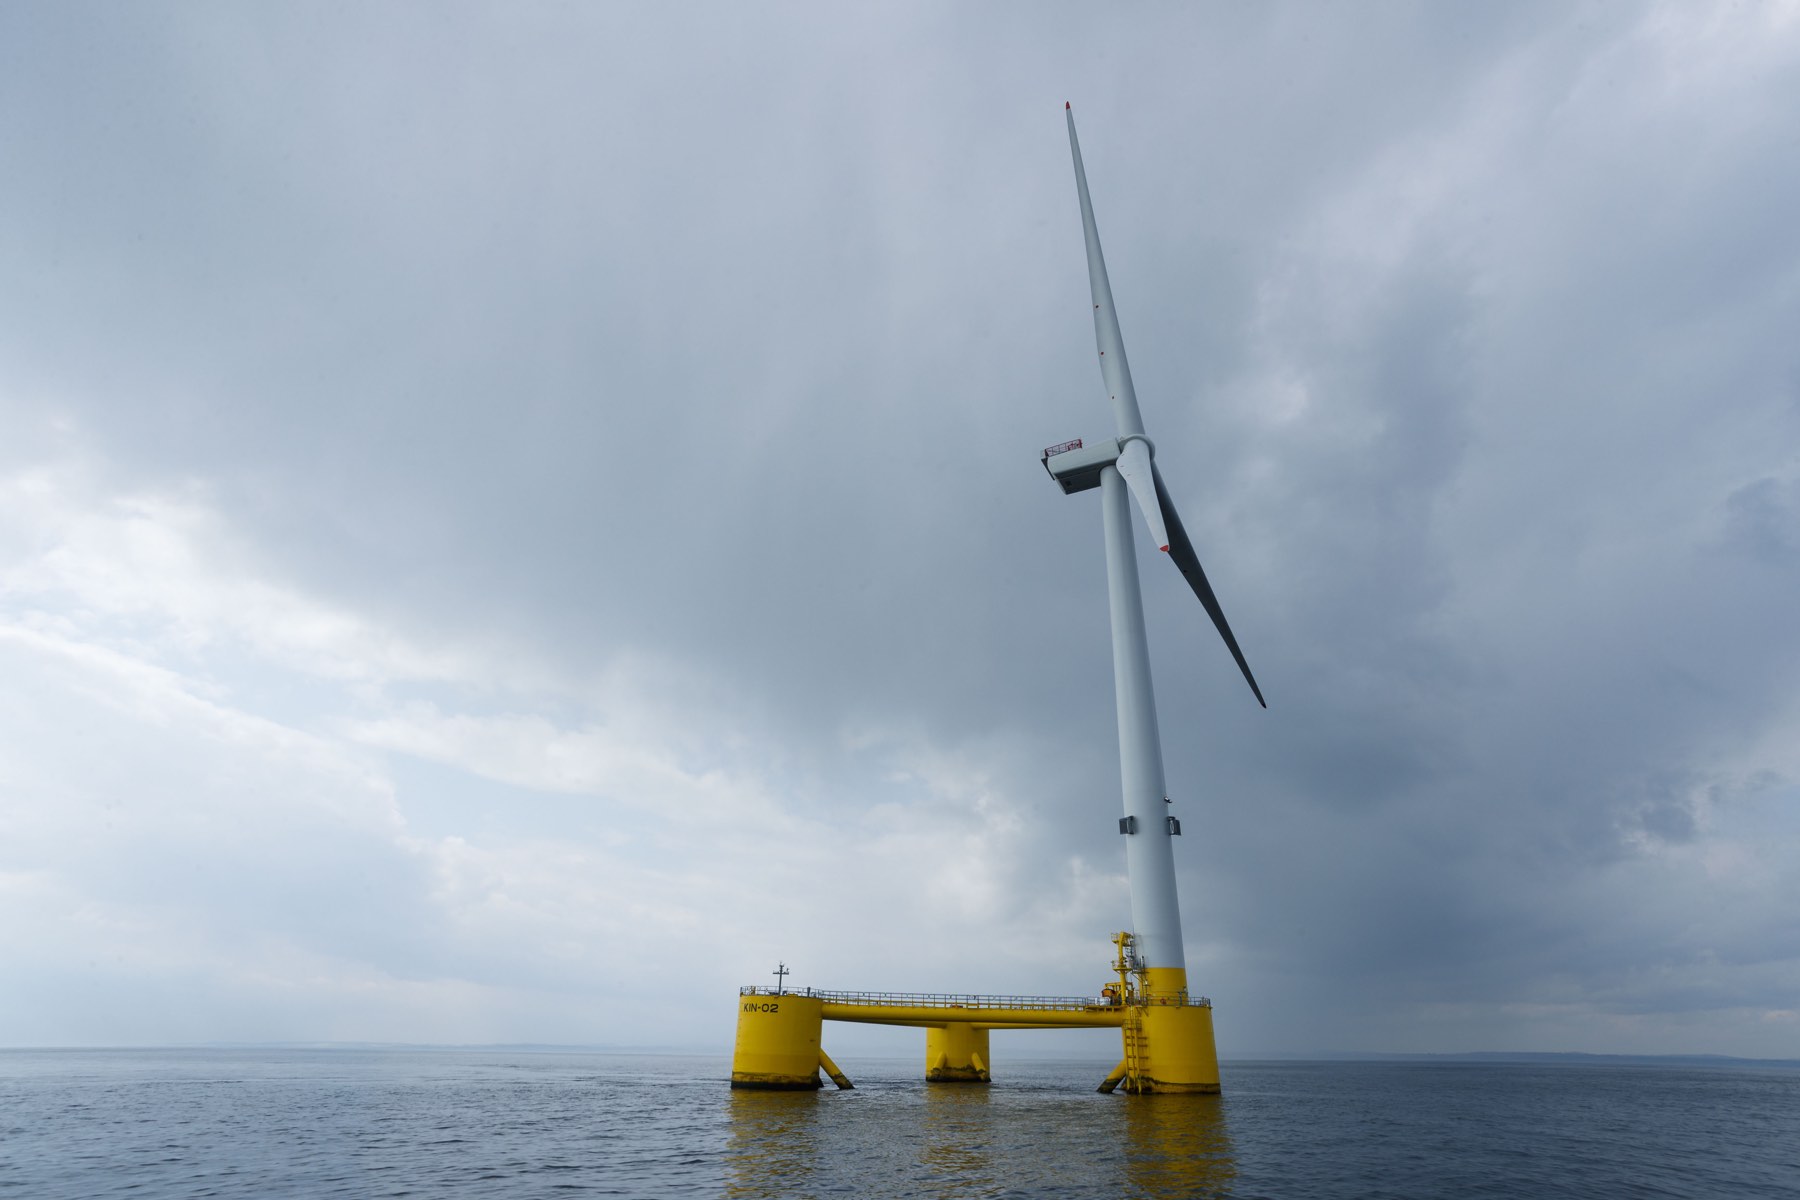 Flotation Energy and Vårgrønn awarded exclusivity to develop up to 1.9 GW of floating offshore wind in Scotland